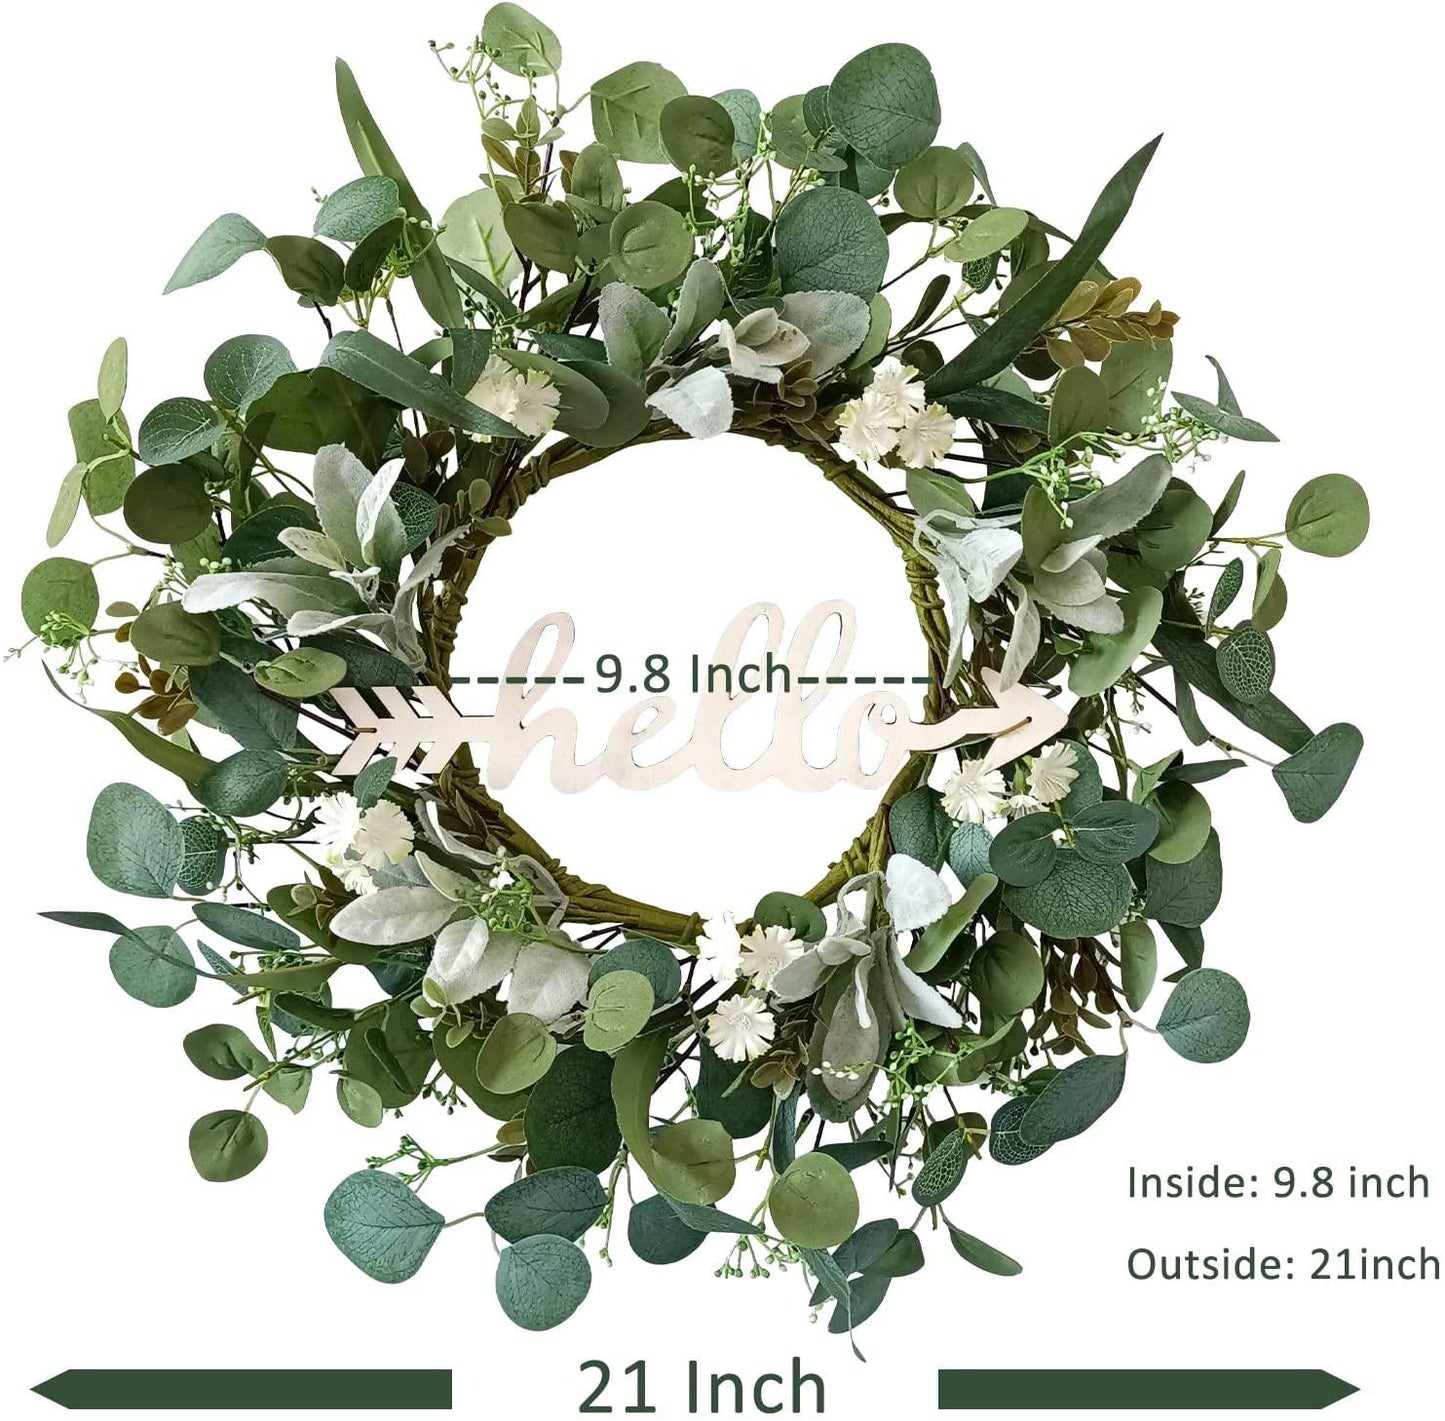 Eucalyptus Wreath with Hello Sign, TOKCARE 21 Inch Artificial Lambs Ear Leaves Green Wreath